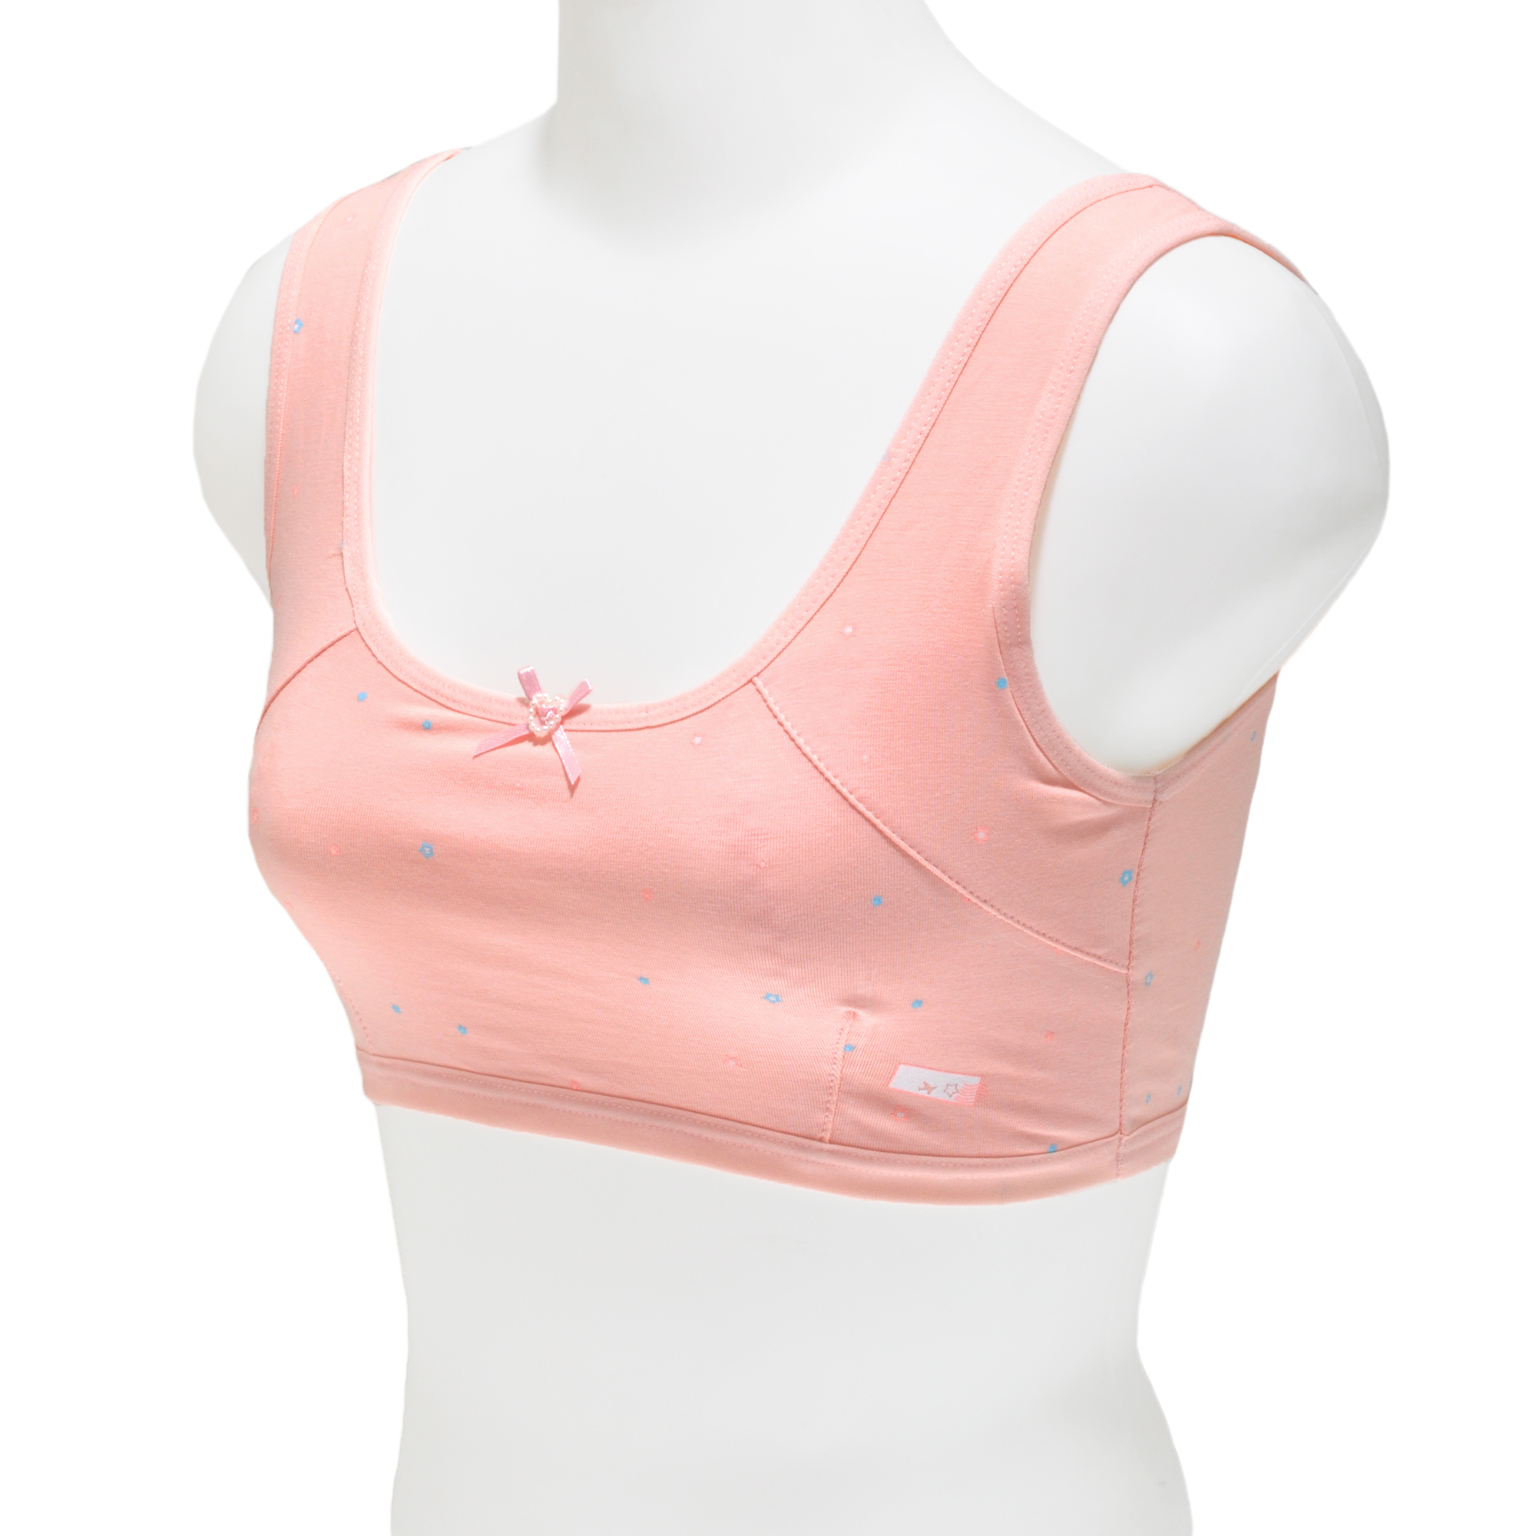 Wholesale Girls' Cotton Training Bras in Assorted Colors - DollarDays